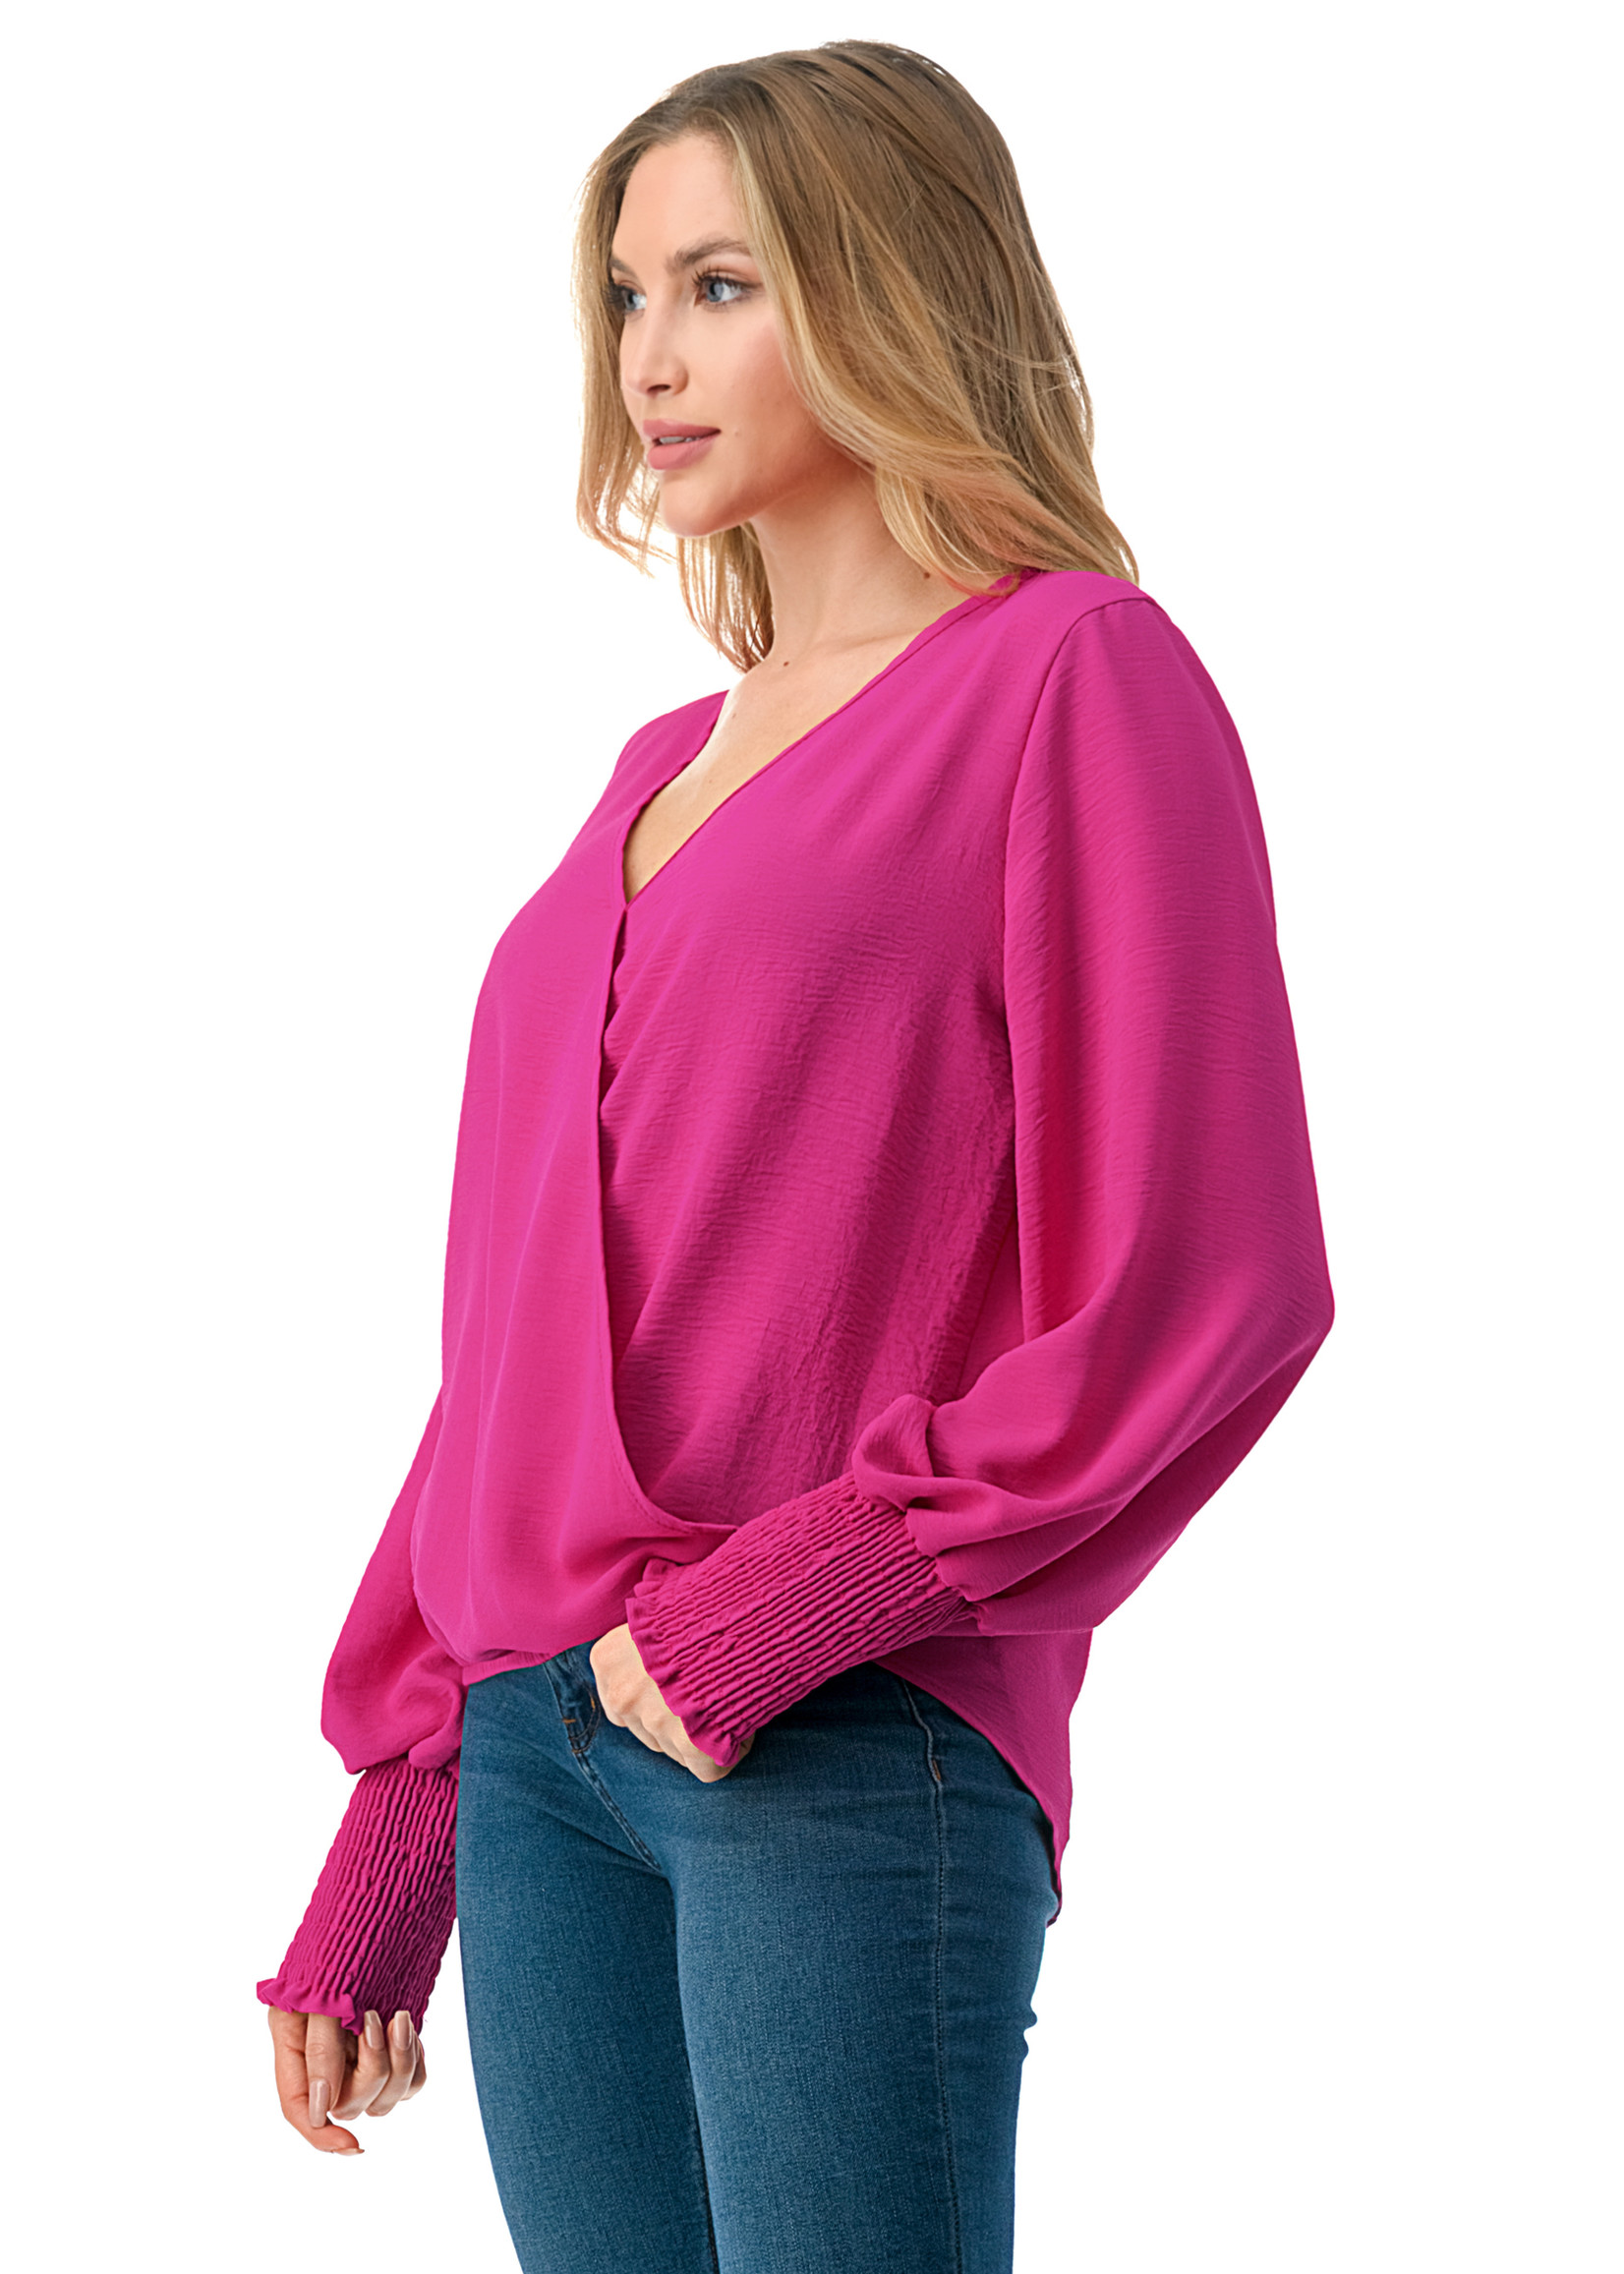 SURPLICE TOP WITH SMOCKING CUFFS HOT PINK